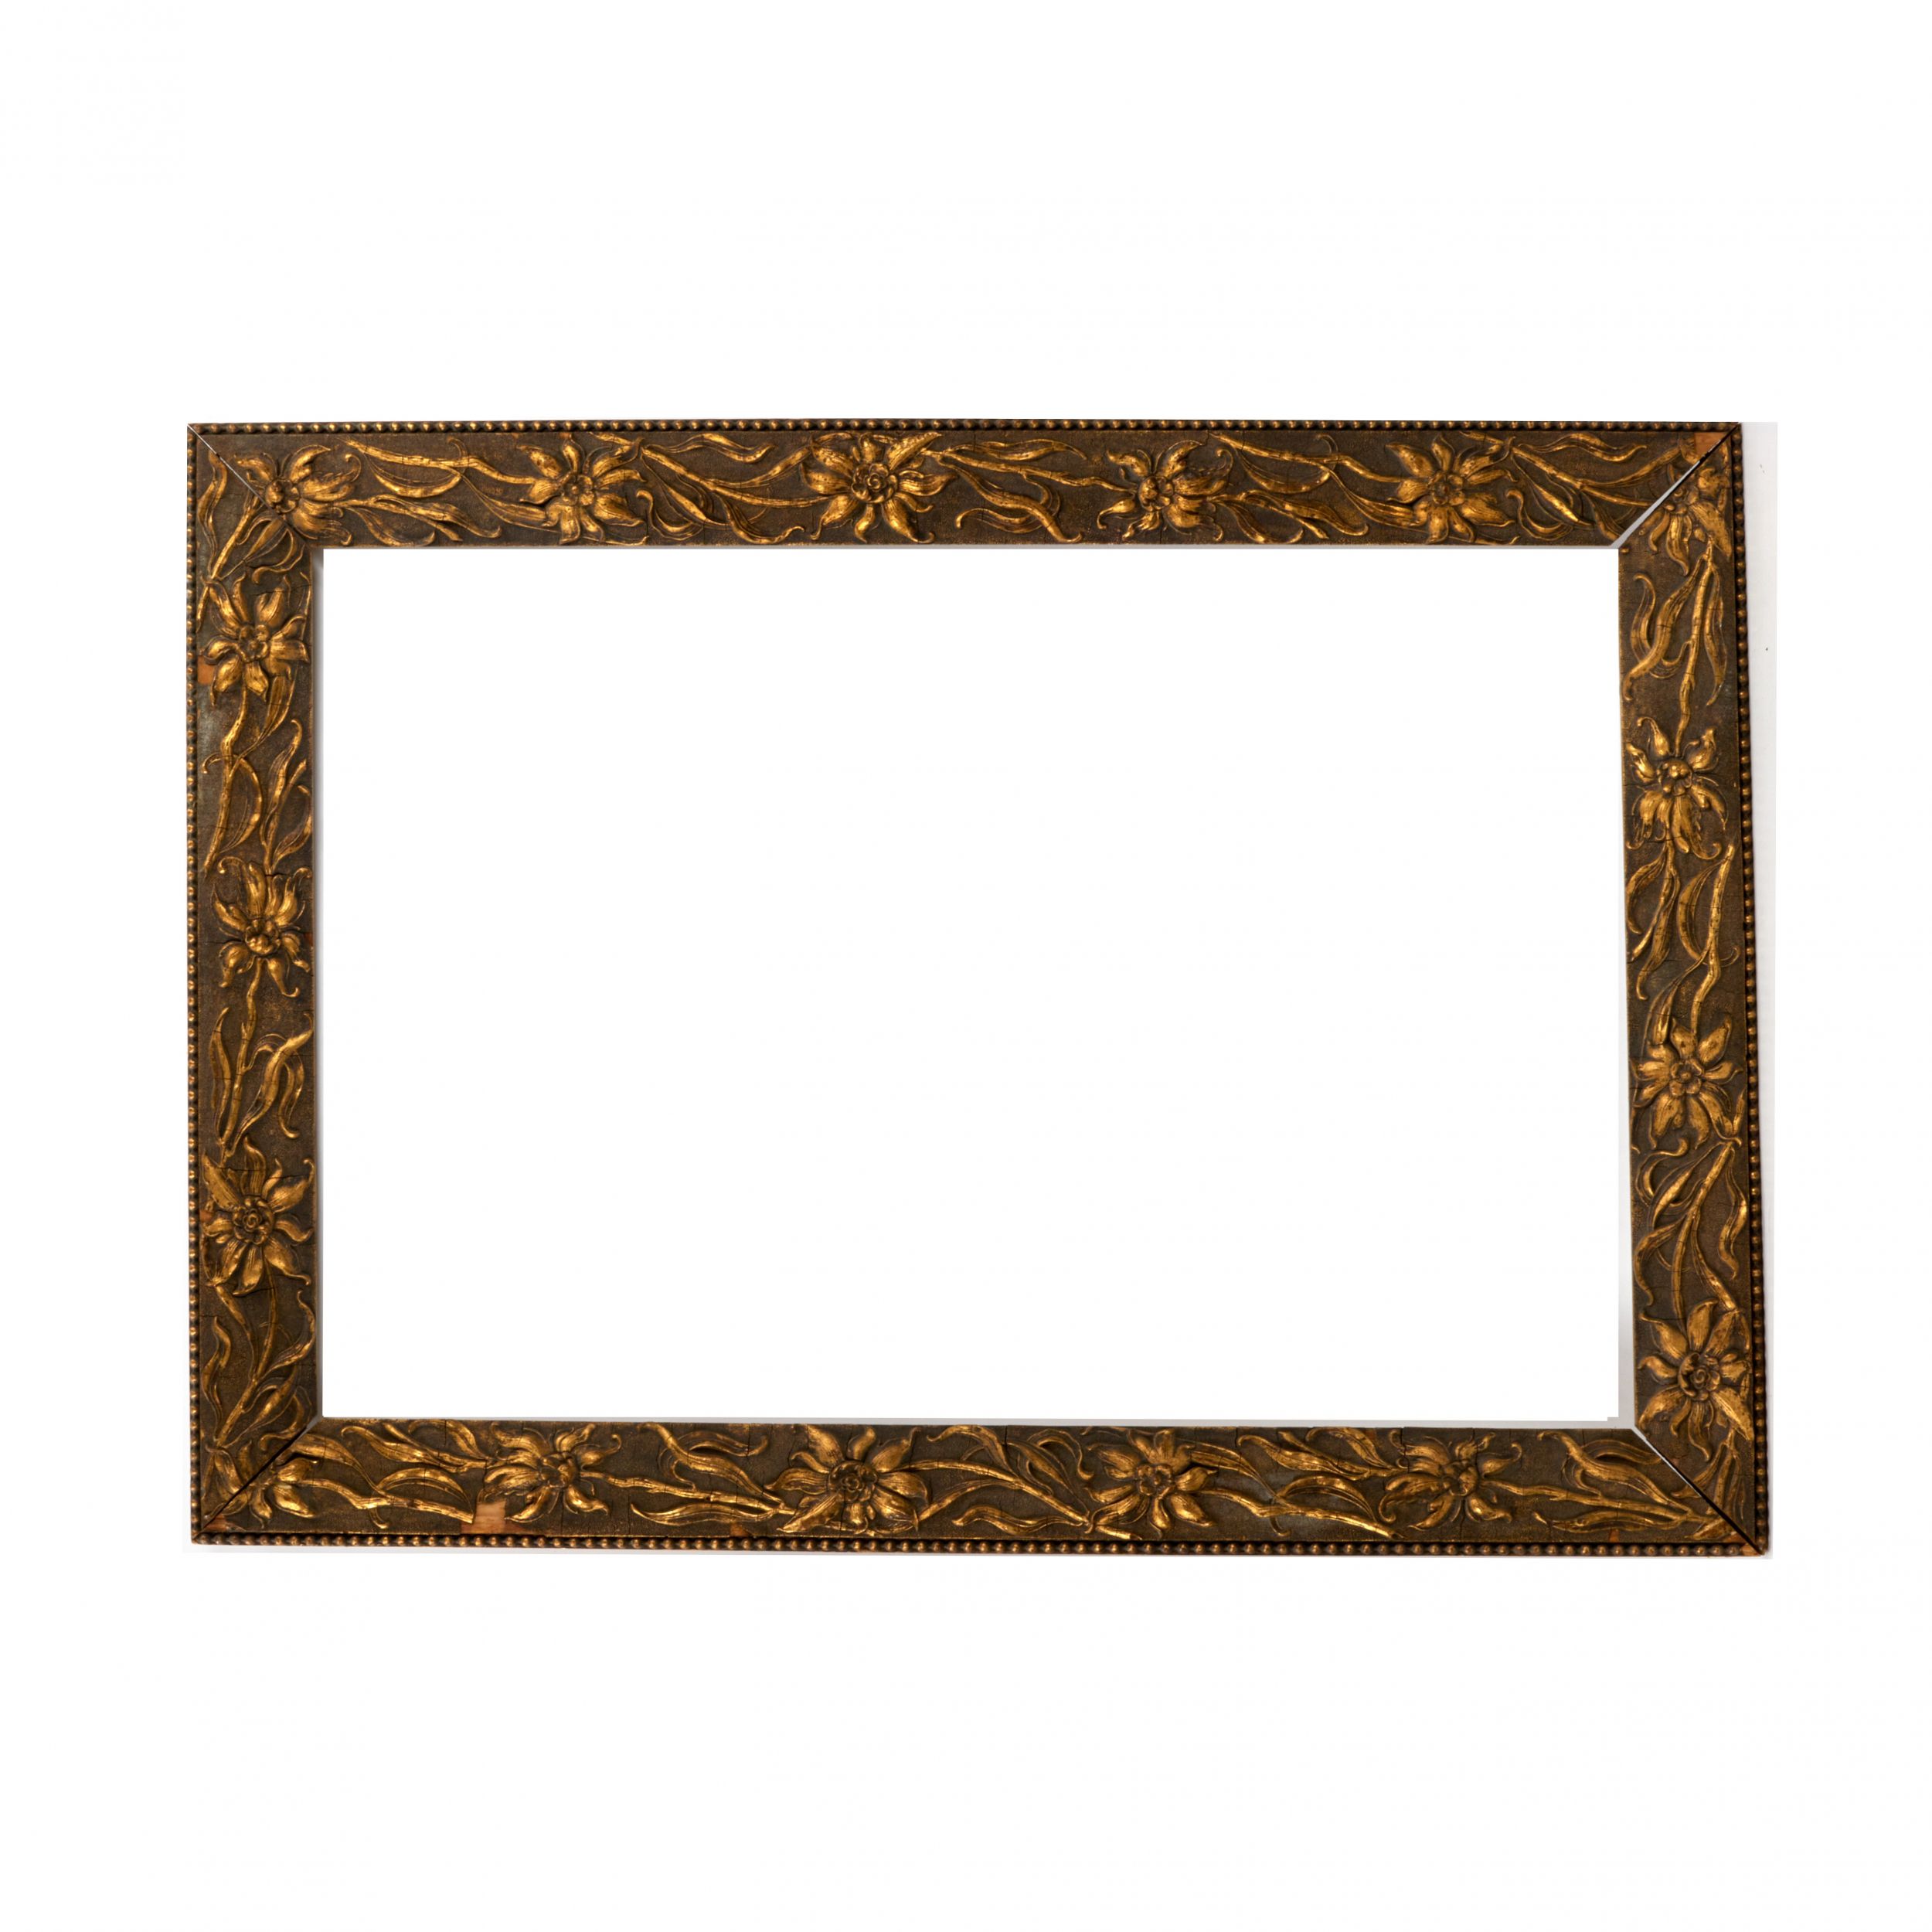 Picture-frame-in-Art-Nouveau-